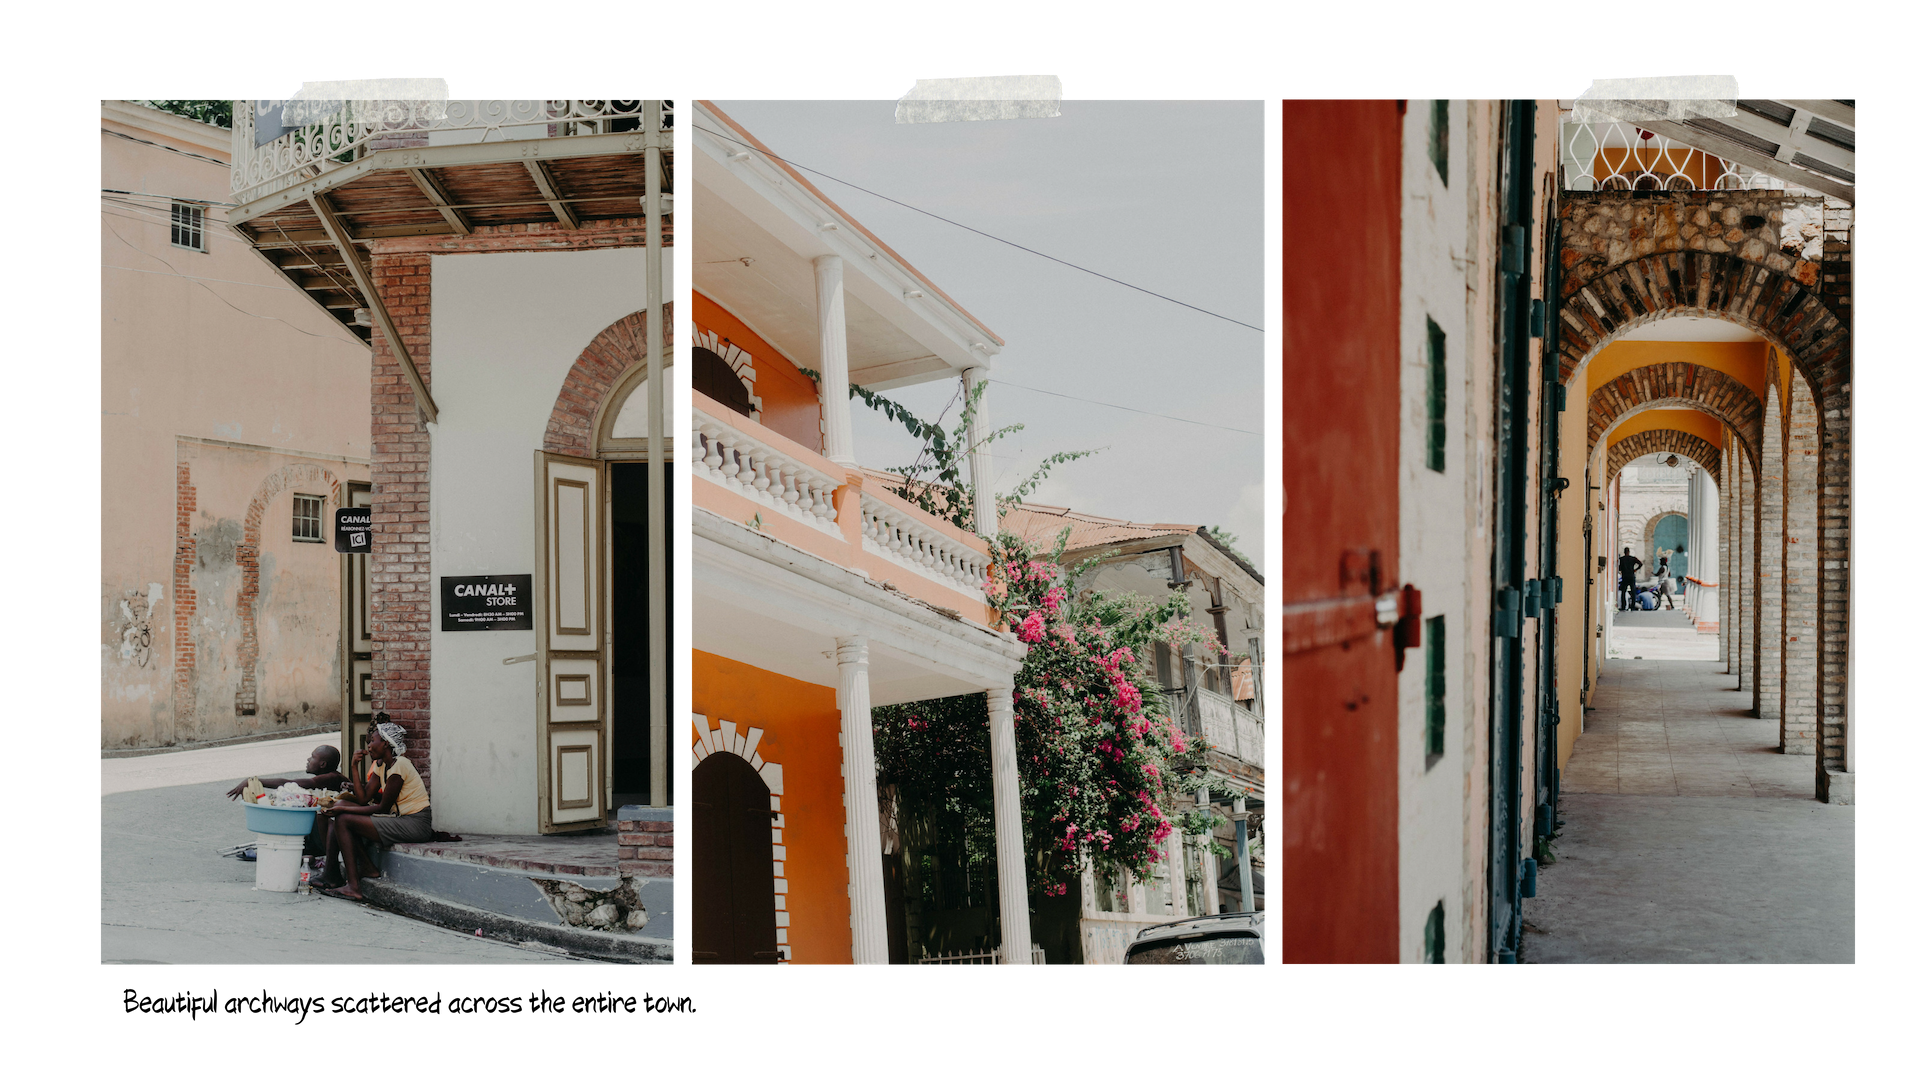 48 hrs in Jacmel, ILERA Apothecary, Summer 2019 Campaign